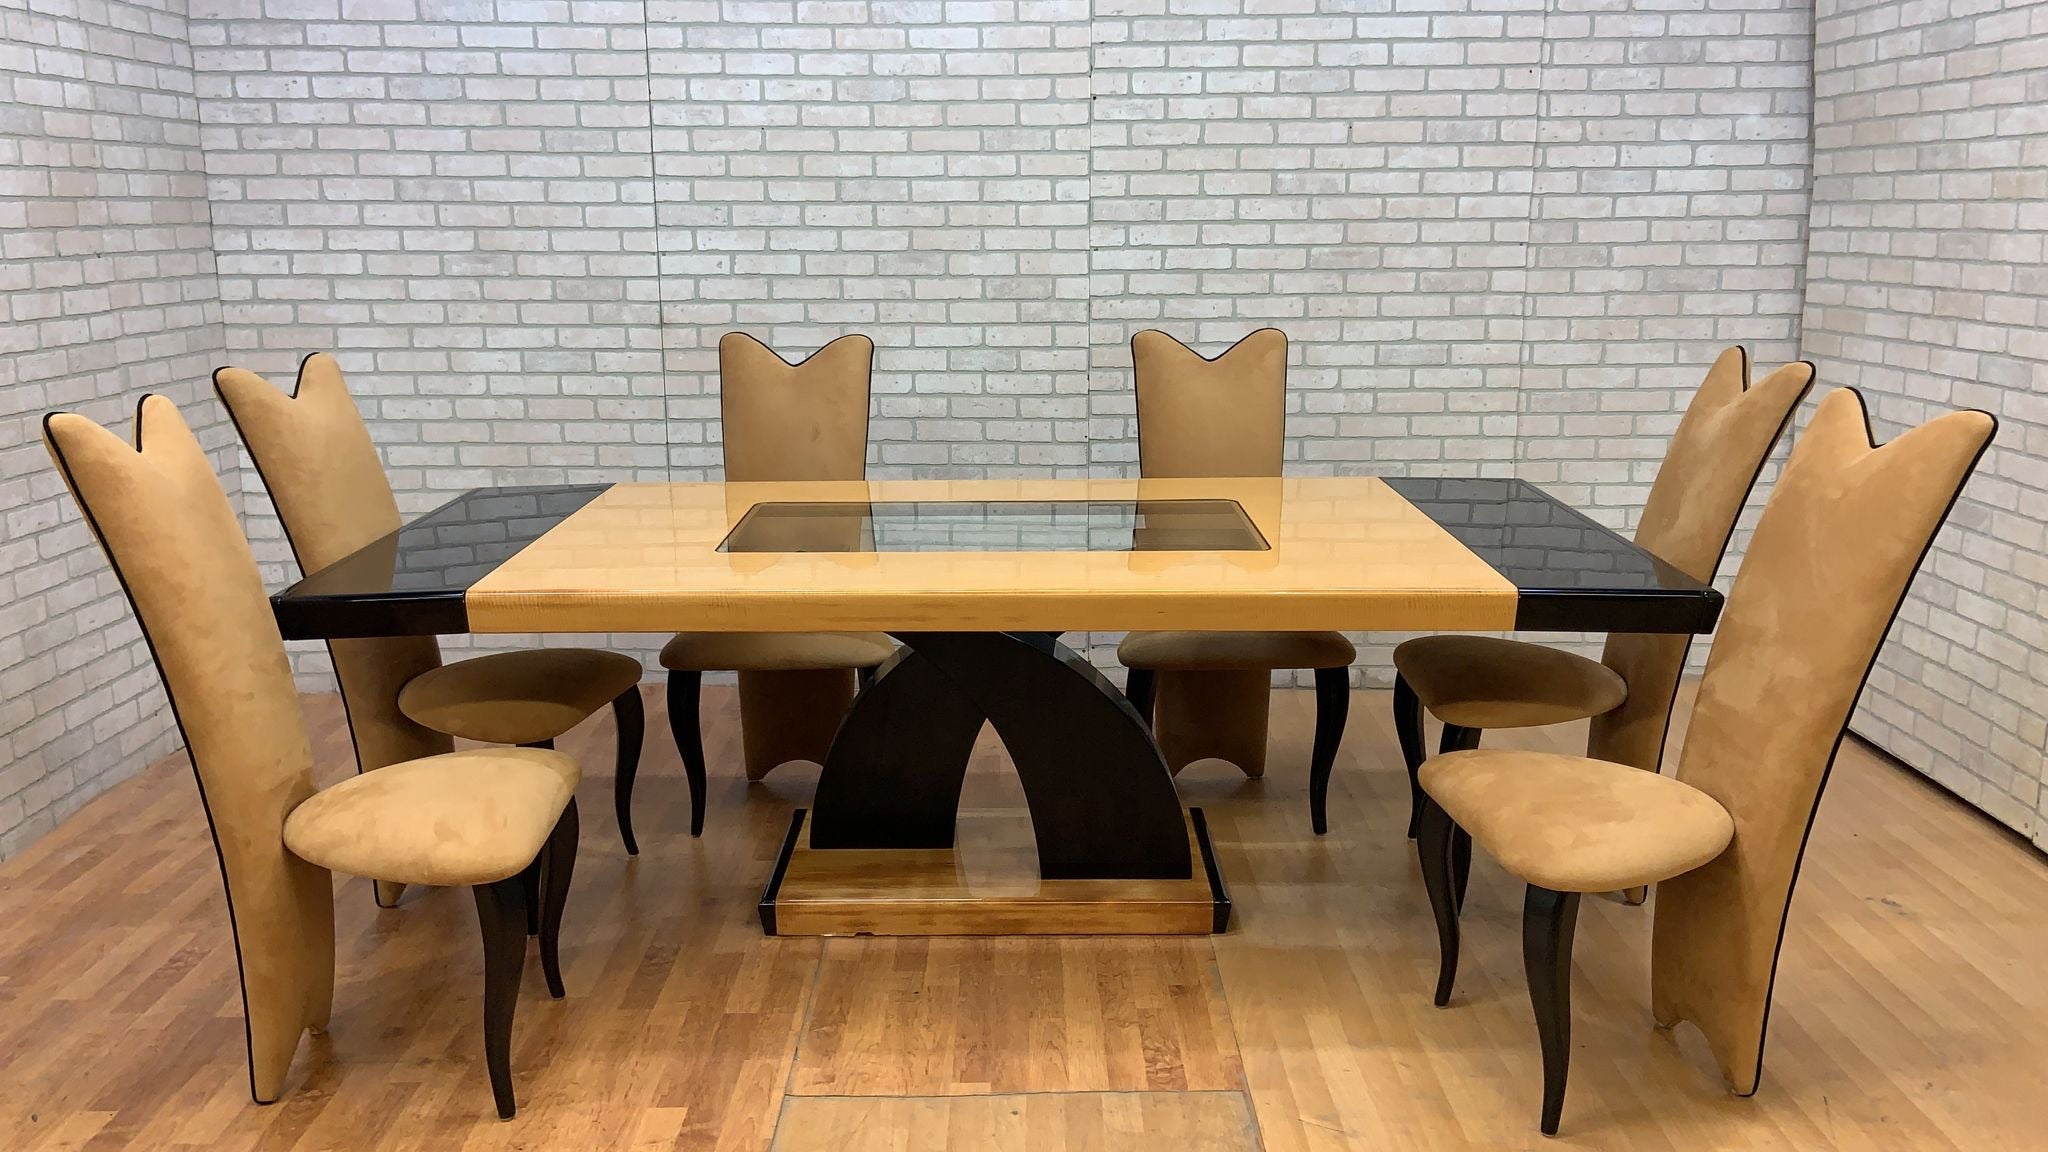 Vintage Italian Art Deco Extending Dining Table with 6 High Back Dining Chairs - 9 Piece Set